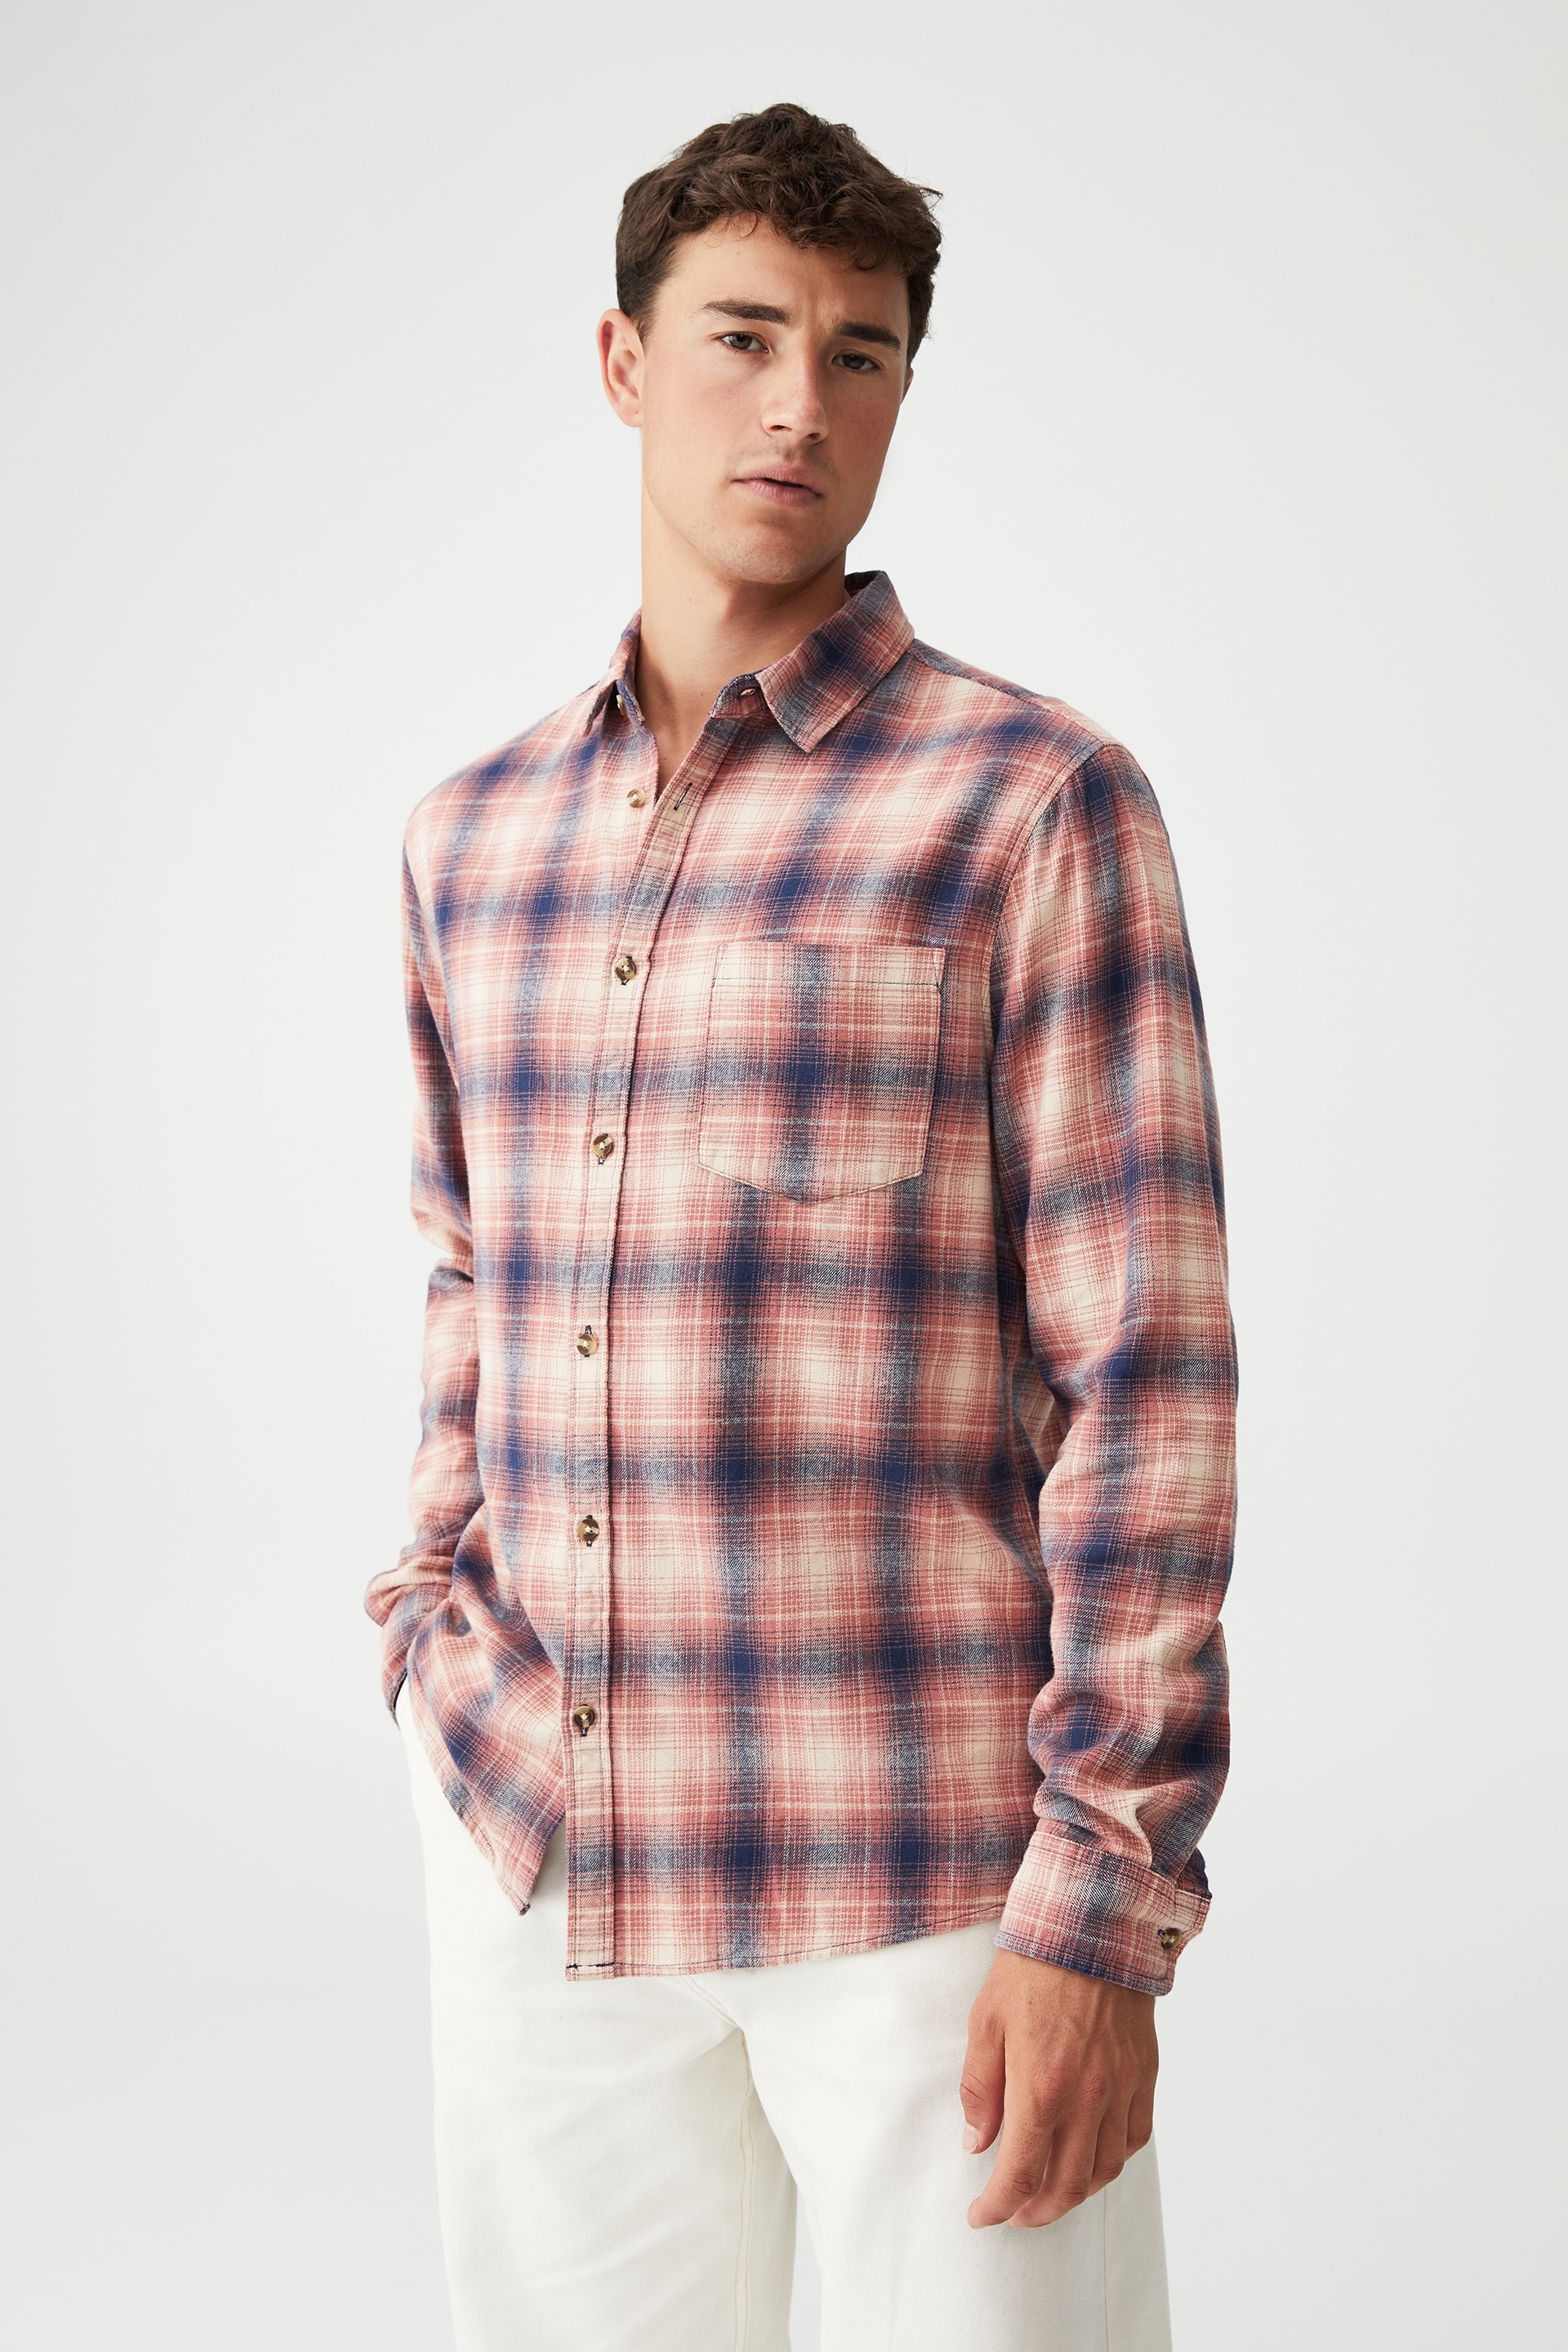 Cotton On Men - Camden Long Sleeve Shirt - Faded red ombre check